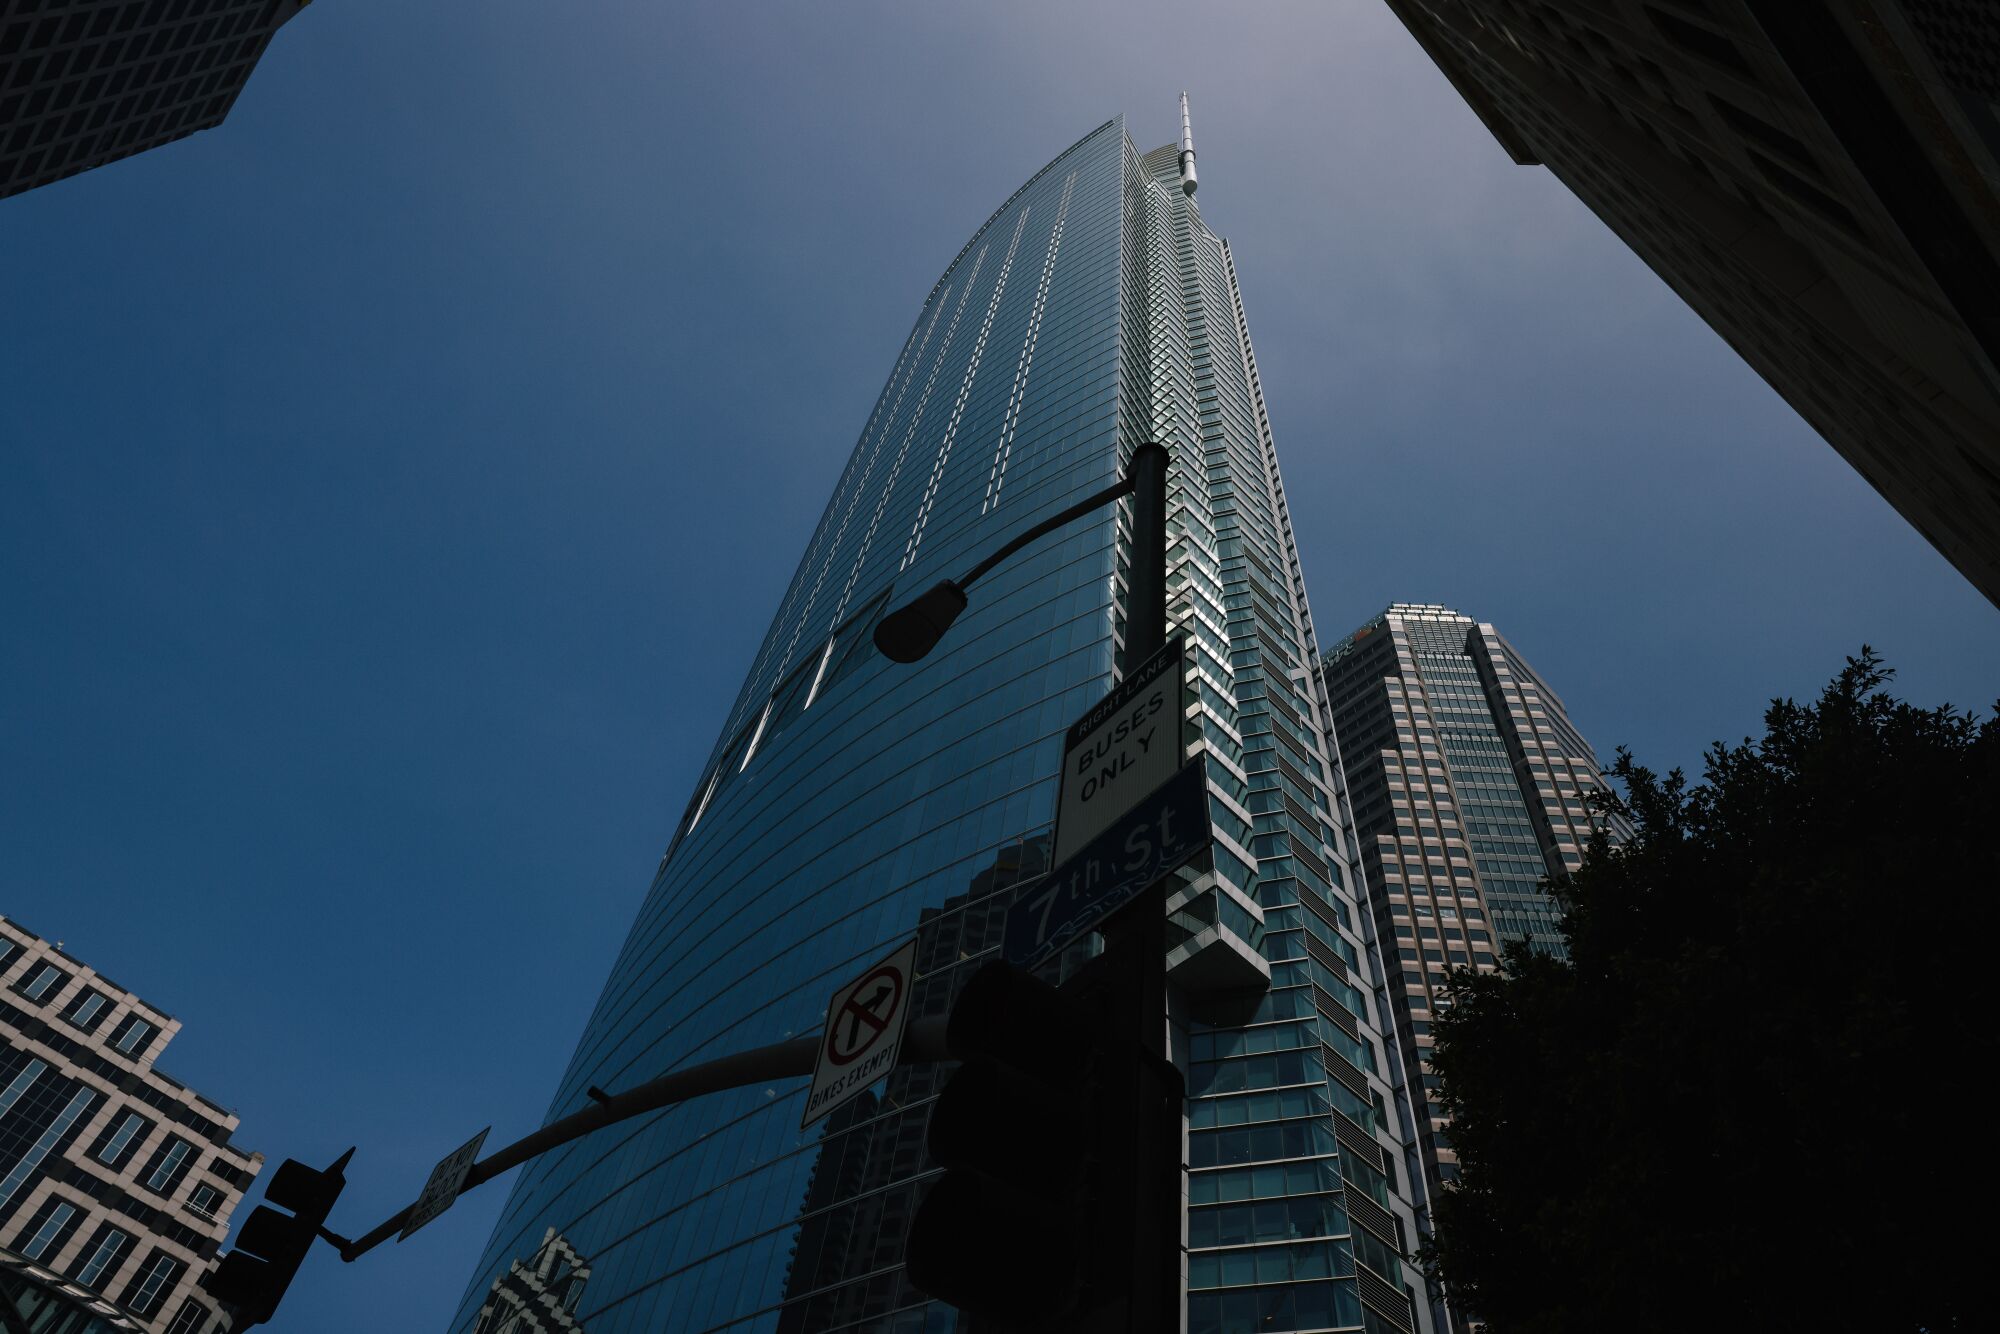 Wilshire Grand Center, a hotel and office skyscraper in L.A.'s financial district.